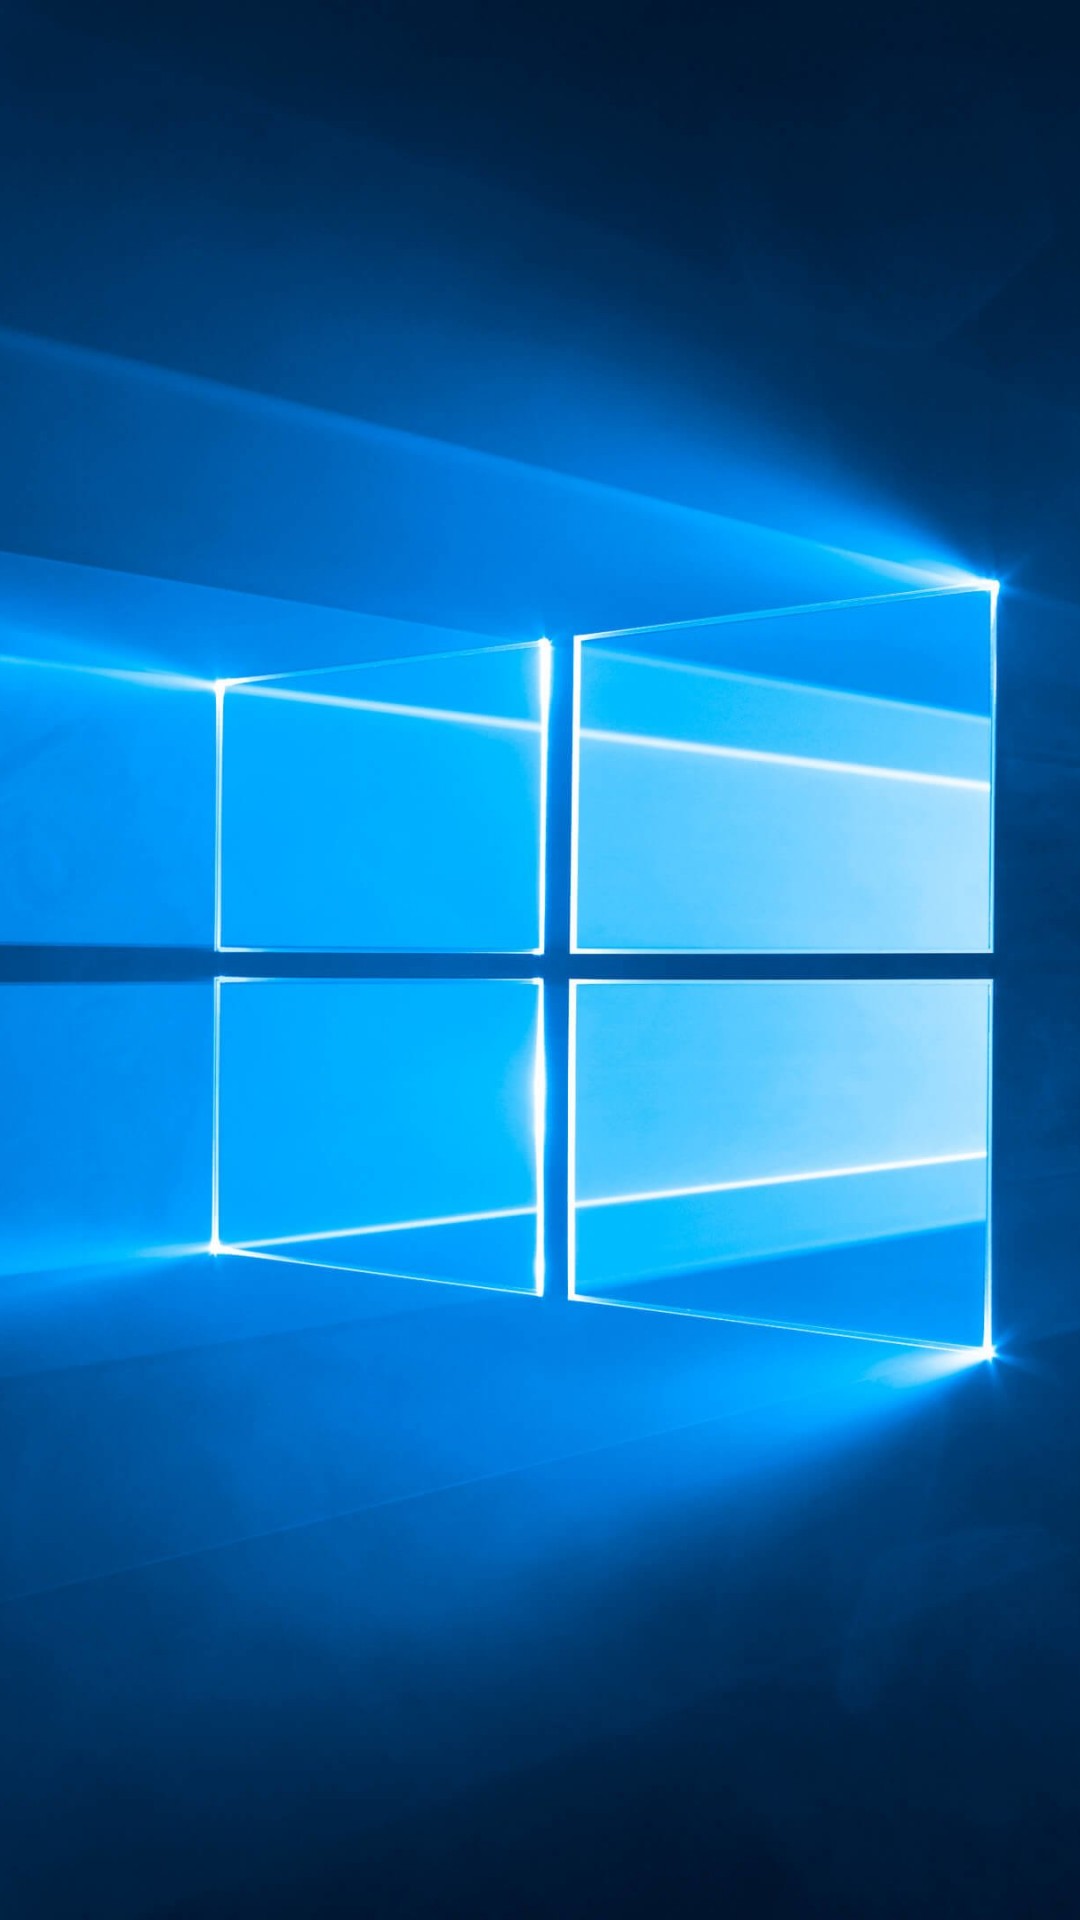 Windows 10 Official Wallpaper for SAMSUNG Galaxy S4